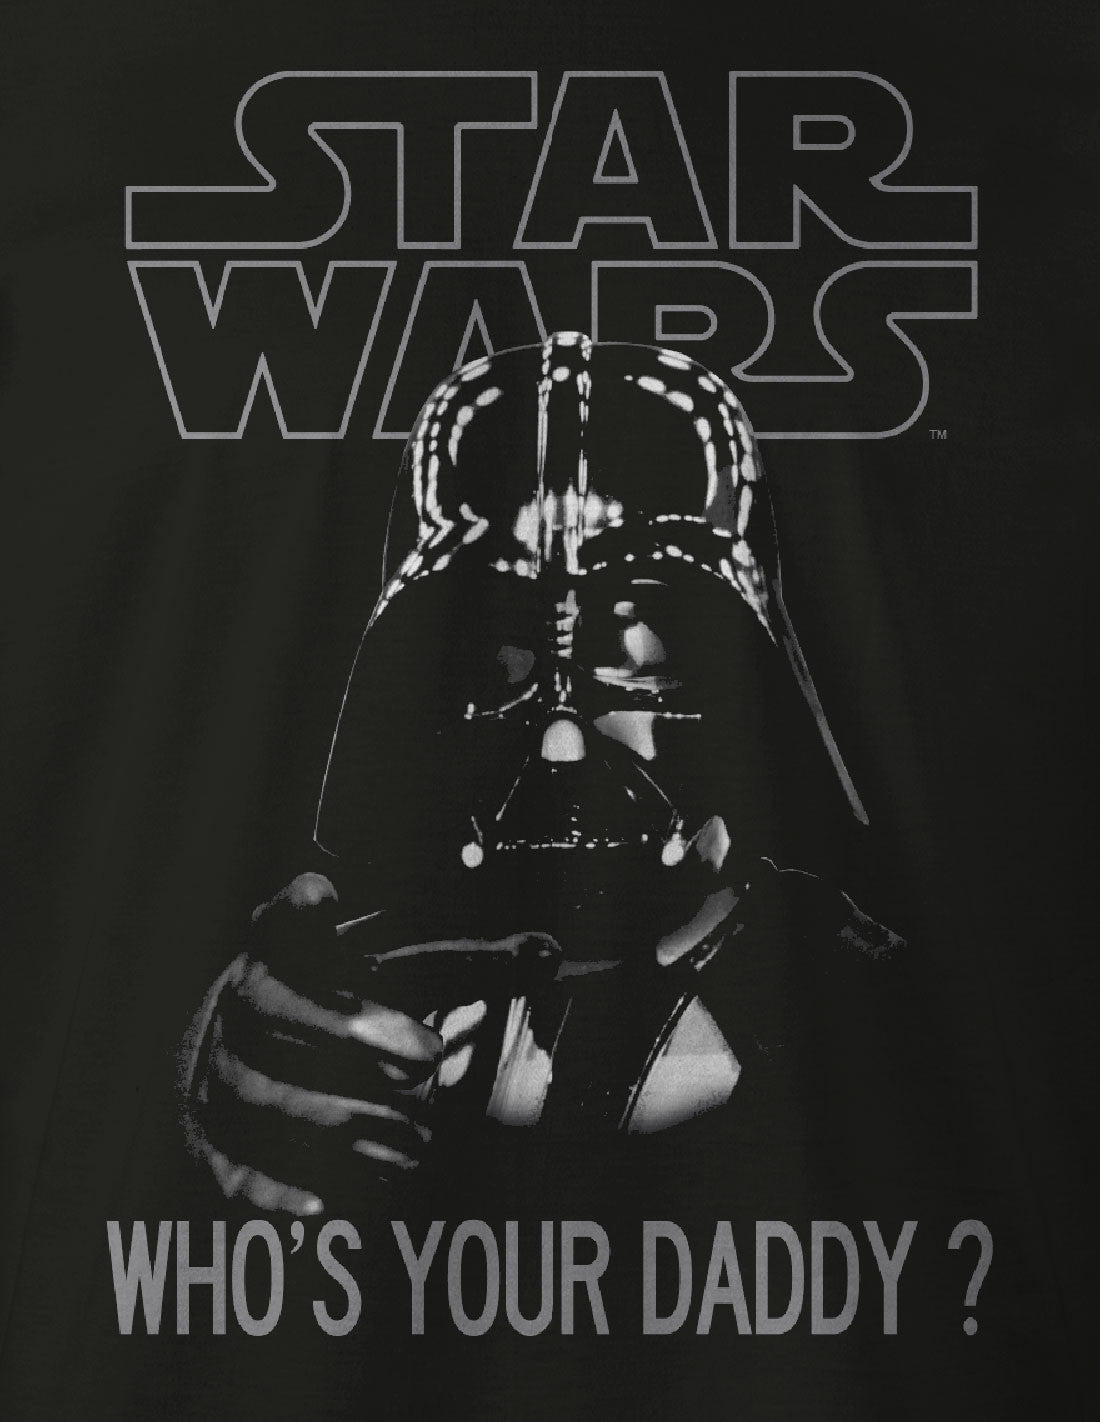 Star Wars t-shirt - Who's your daddy